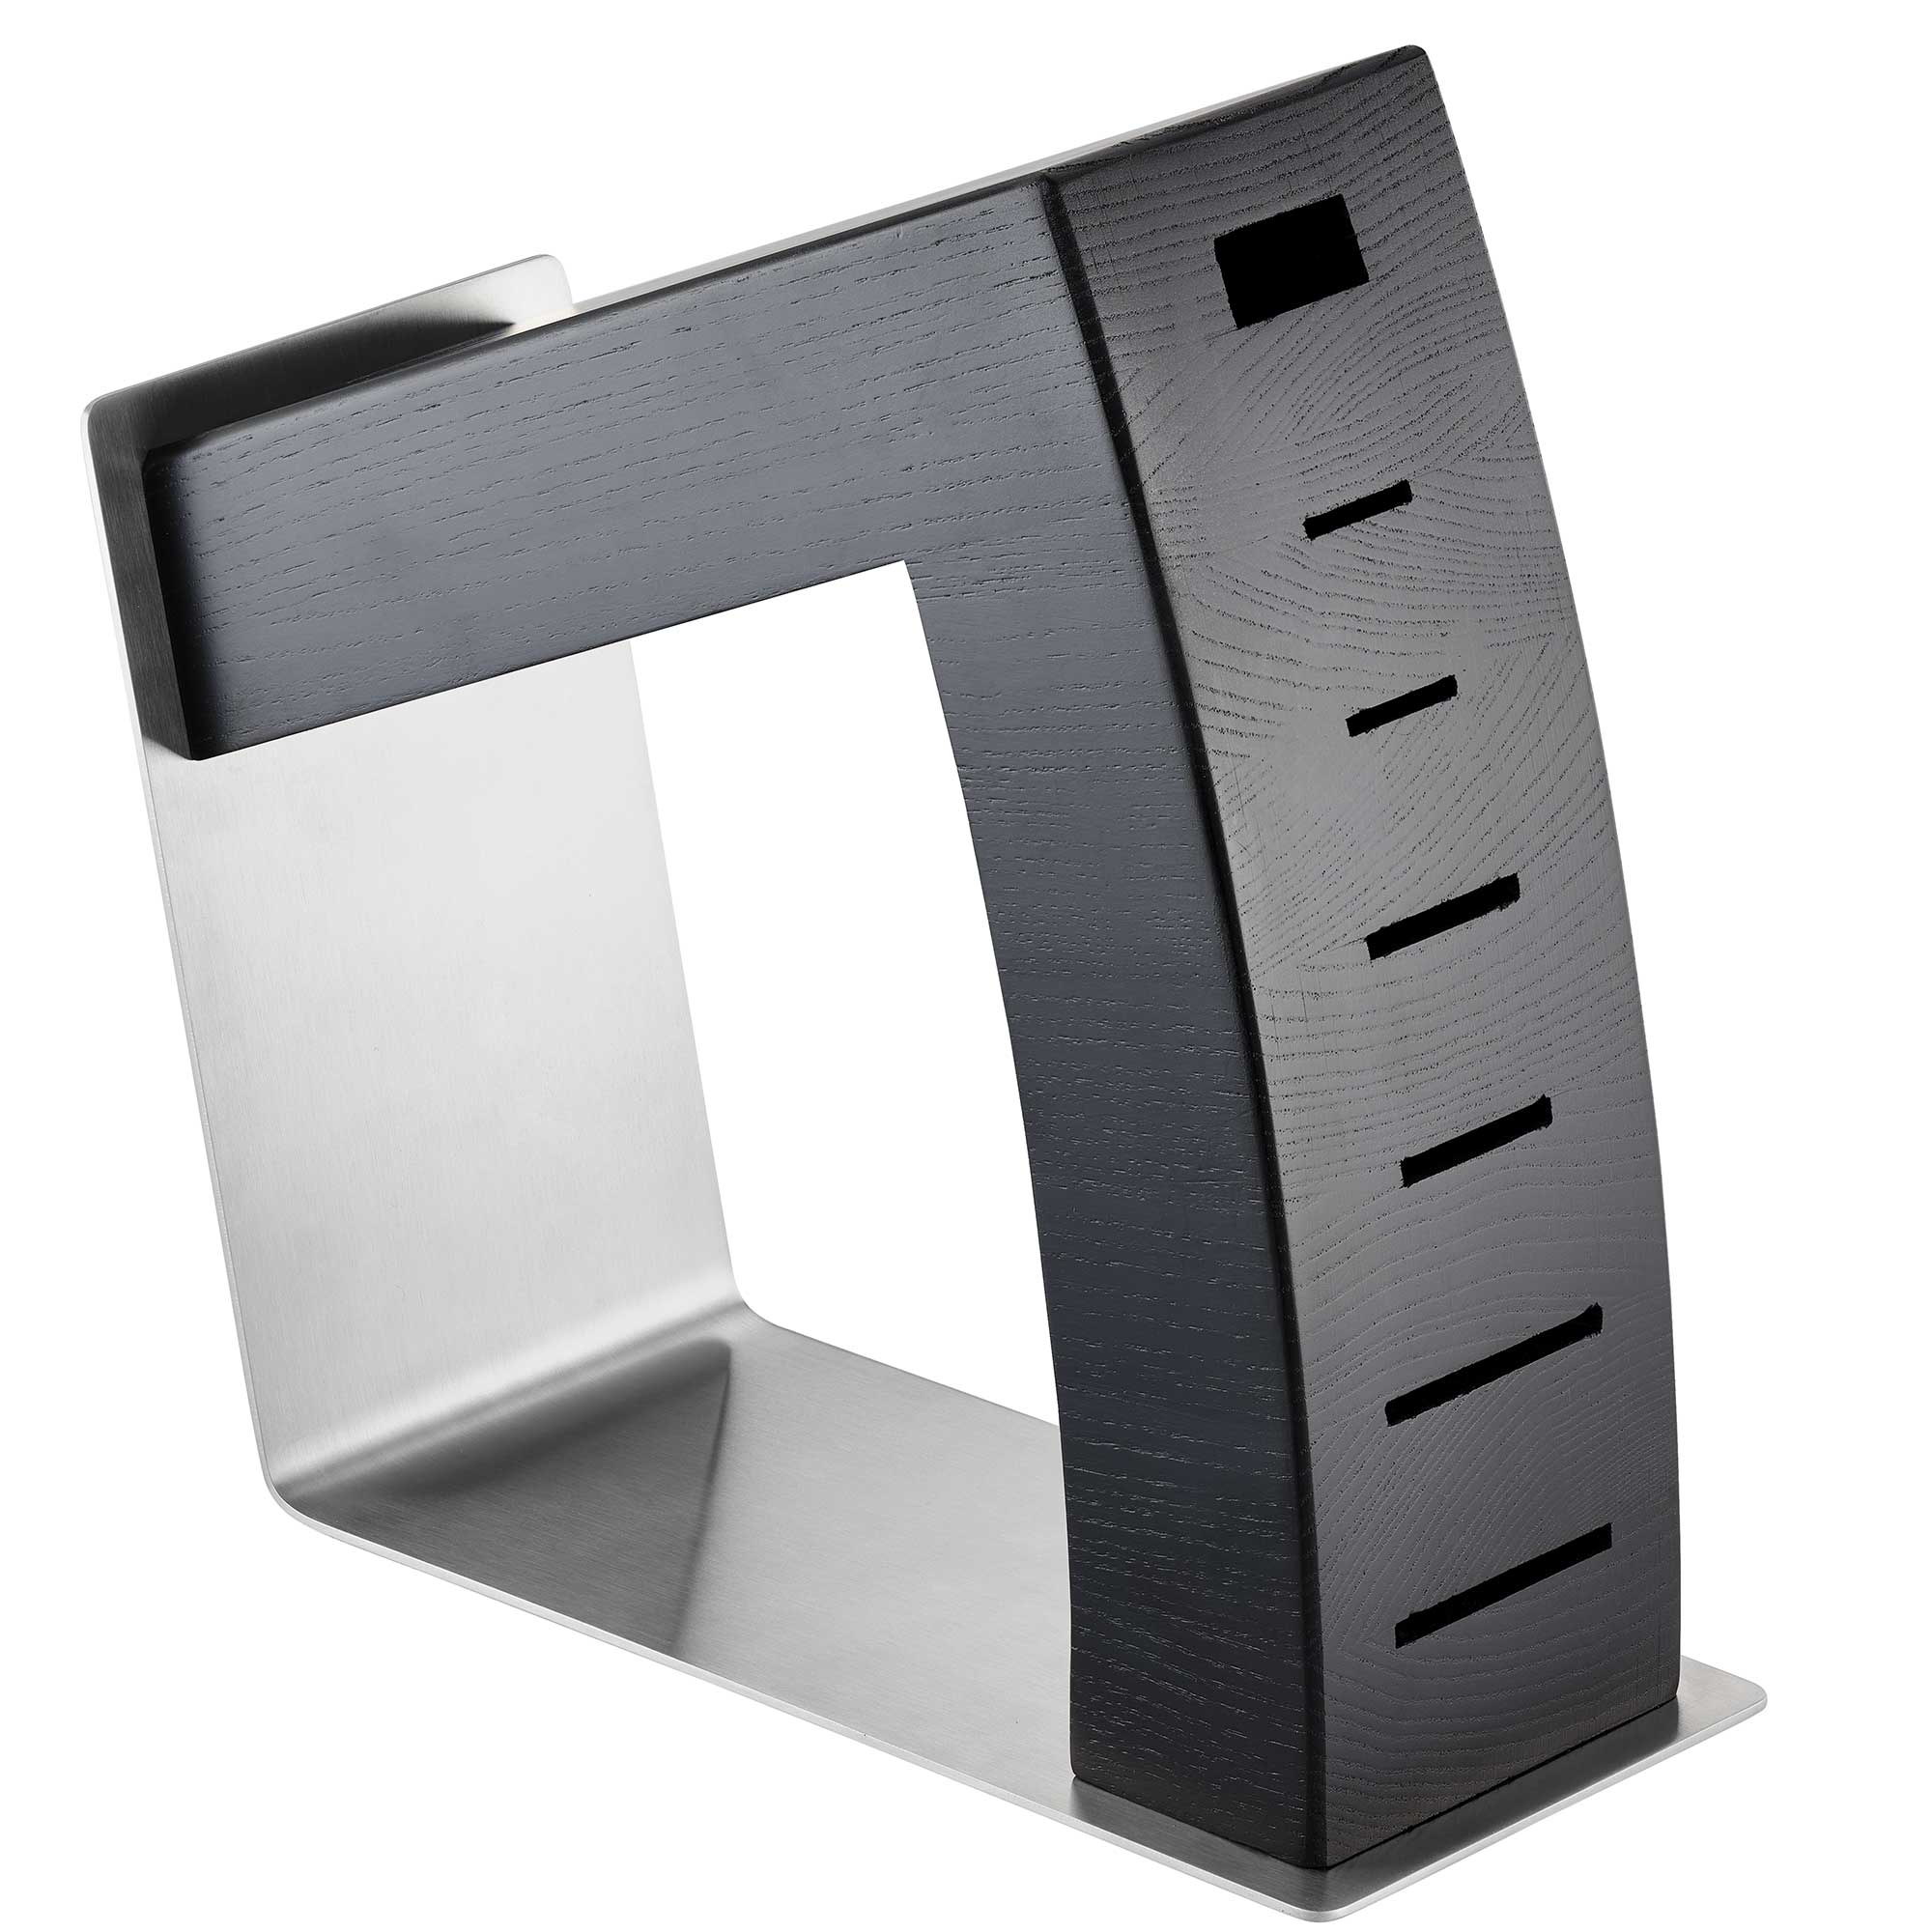 Knife Block "MoveX" black without knives